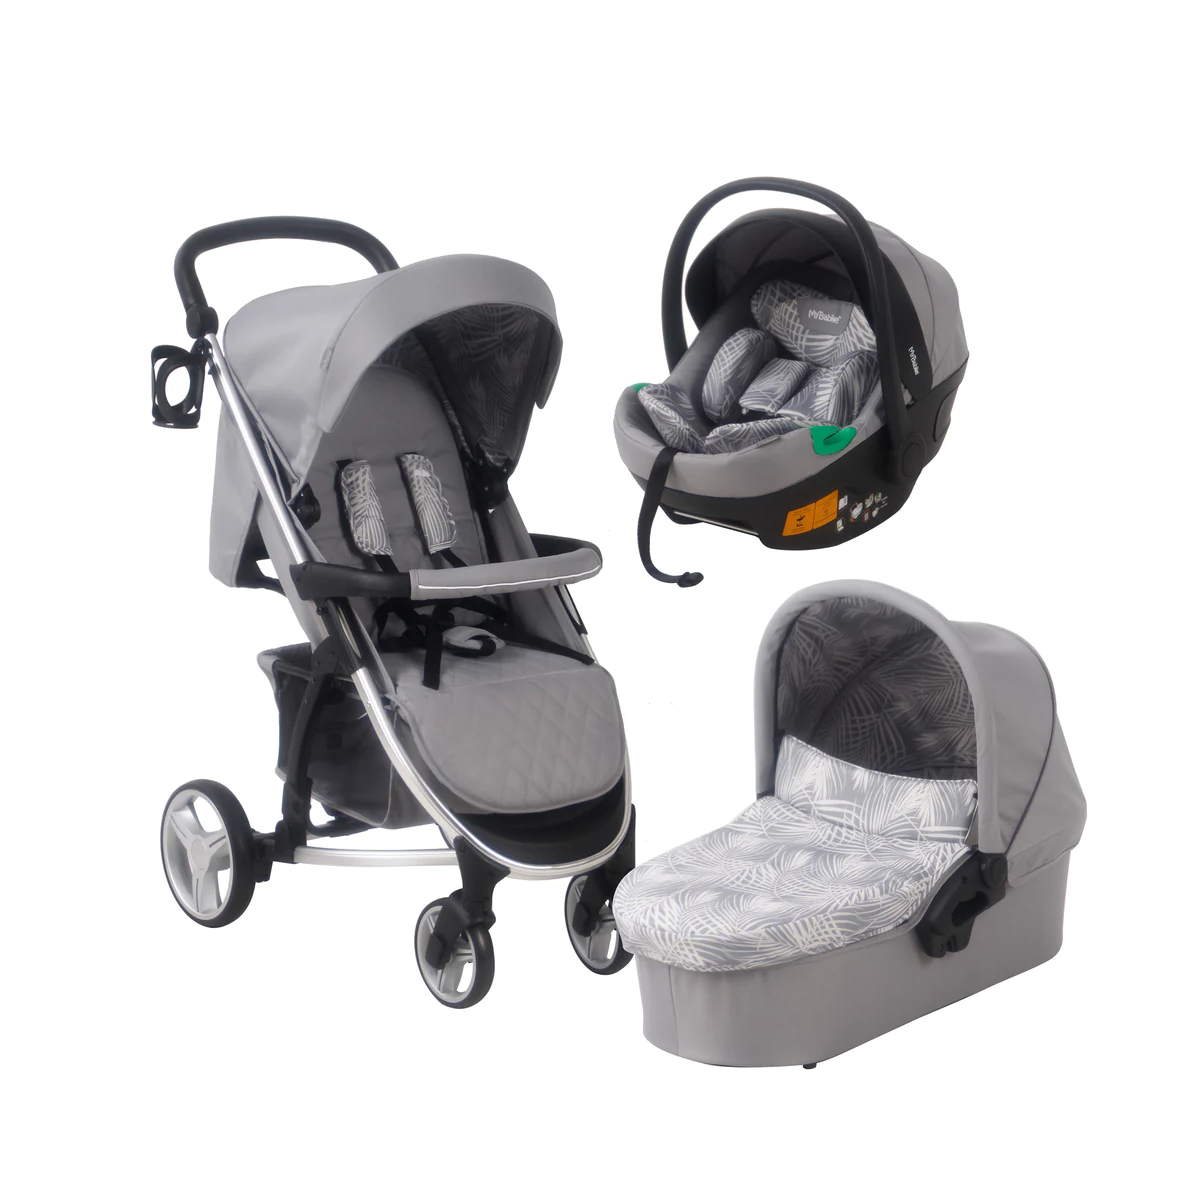 My Babiie MB200i Samantha Faiers iSize Travel System